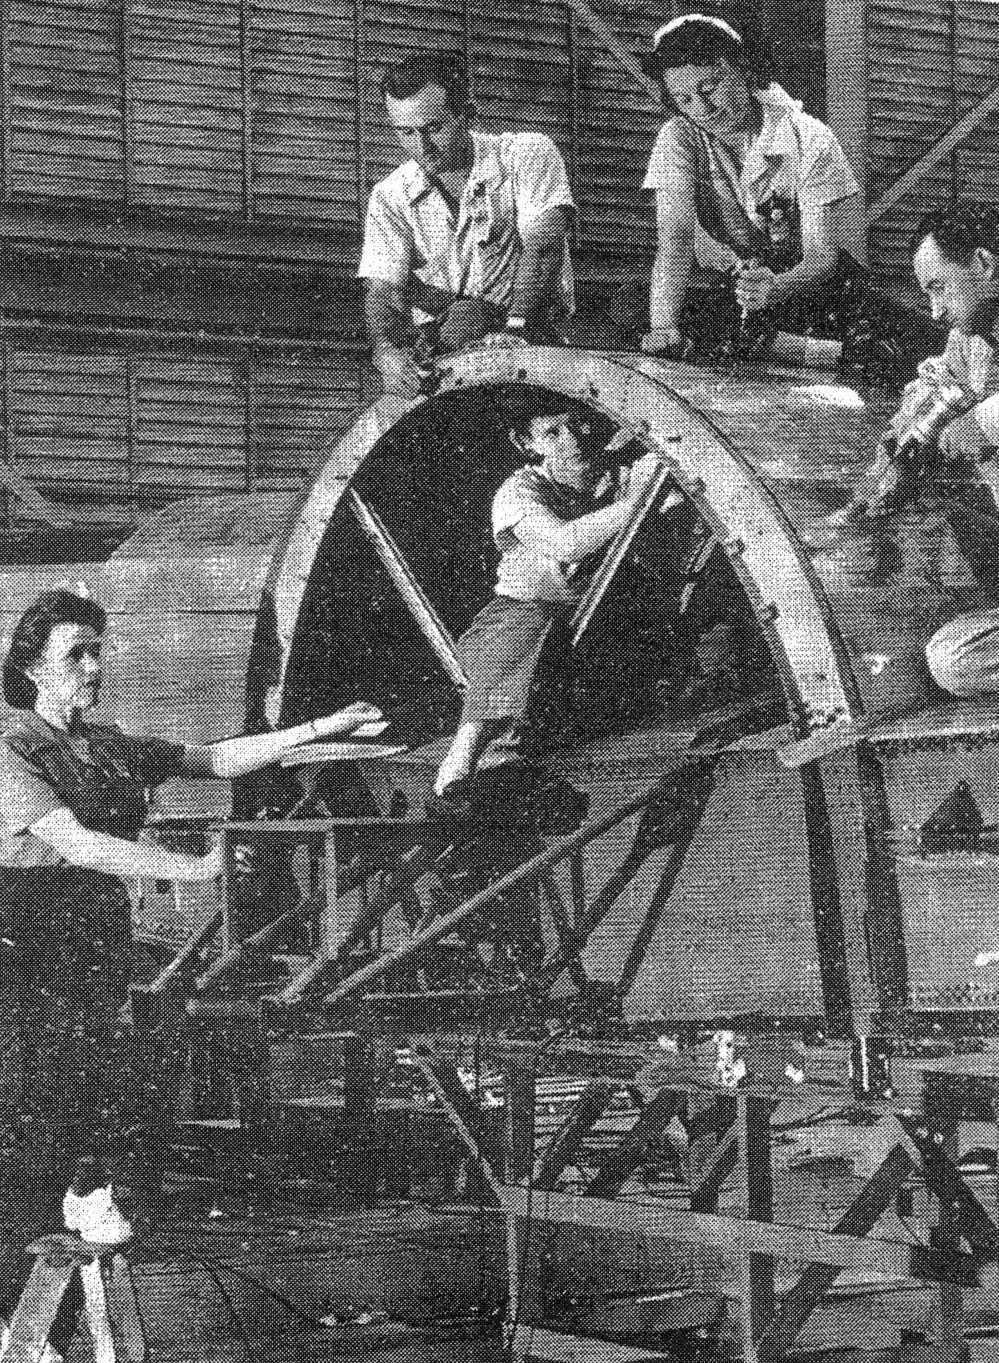 Construction of part of the Tulsamerican at Willow Run Michigan